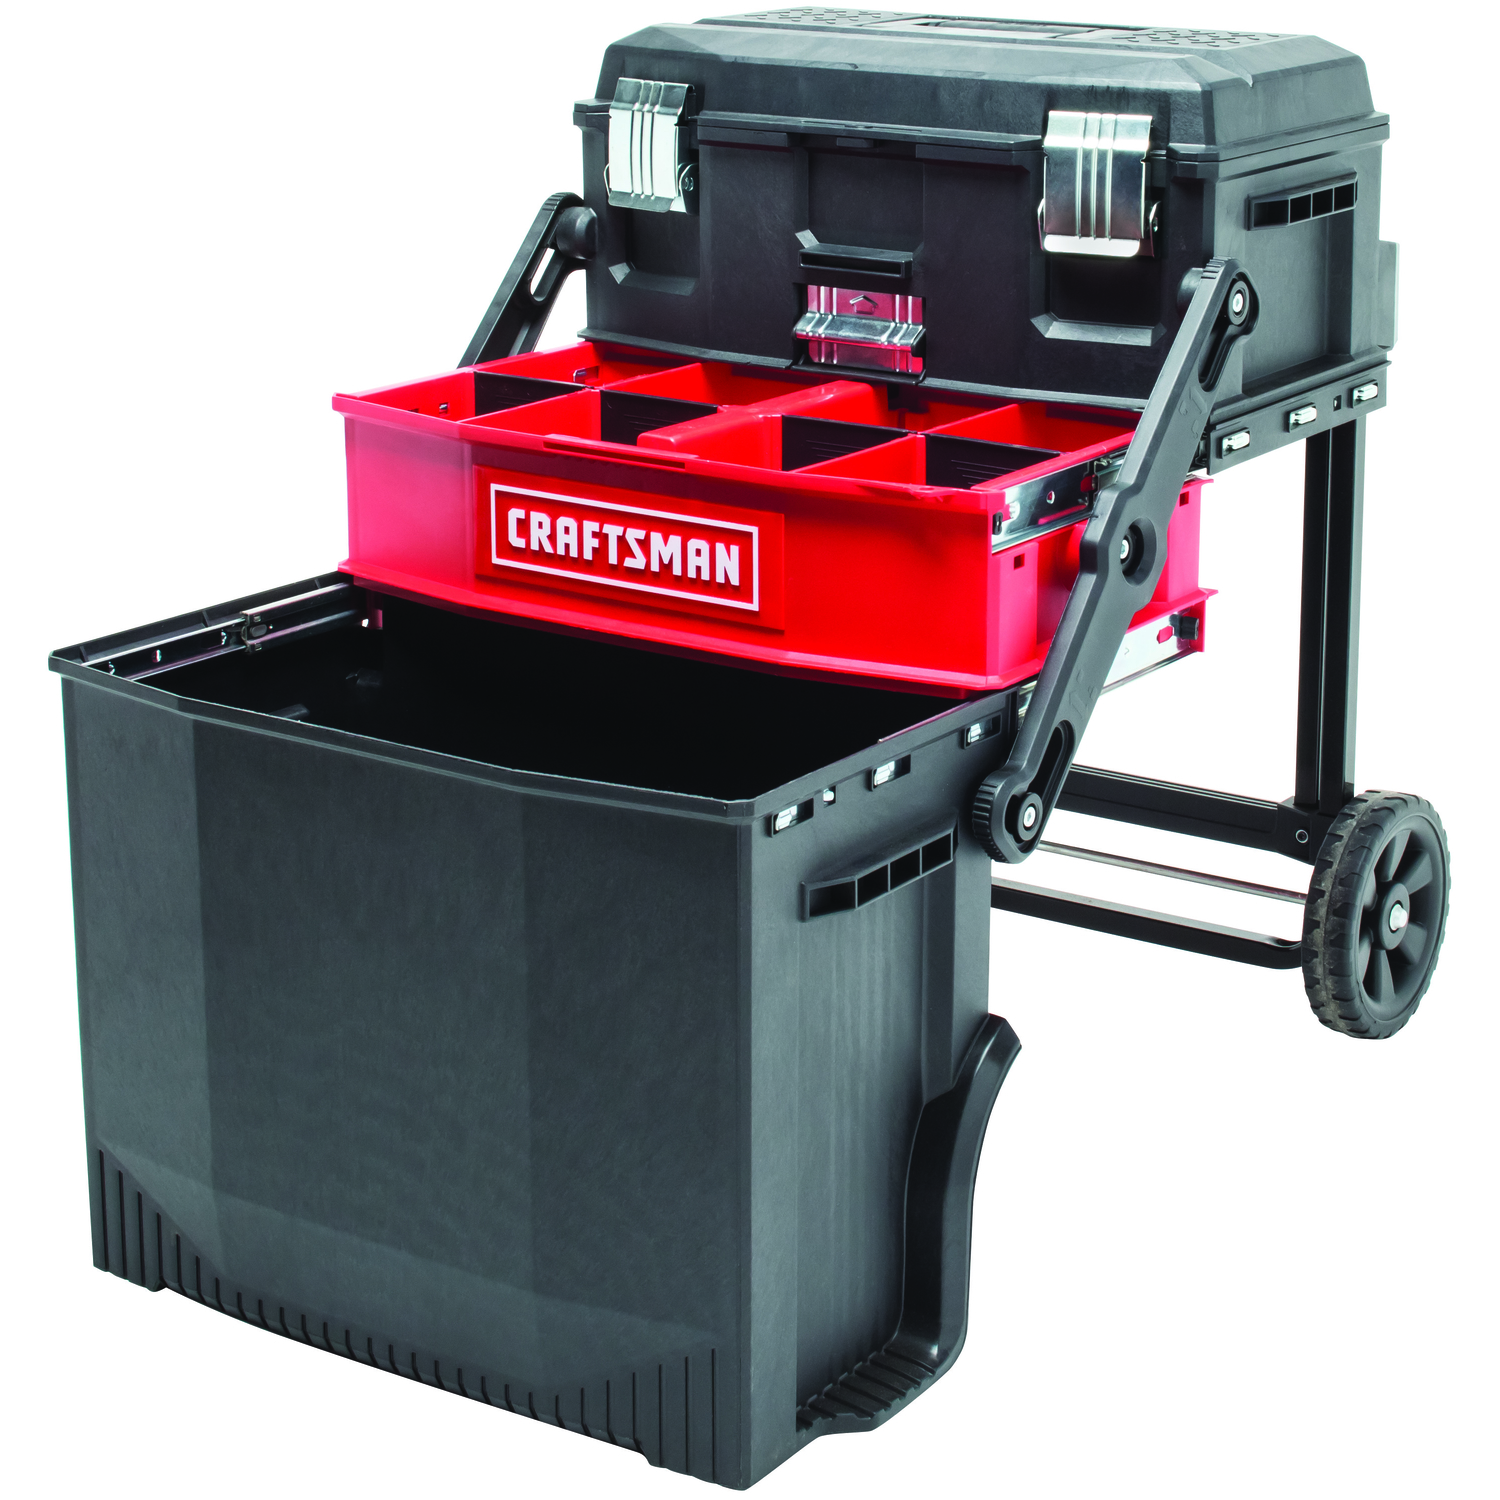 UPC 076174816631 product image for Craftsman 21.5 in. L x 16.2 in. W x 28.8 in. H Multi-Level Workstation 88 lb. ca | upcitemdb.com